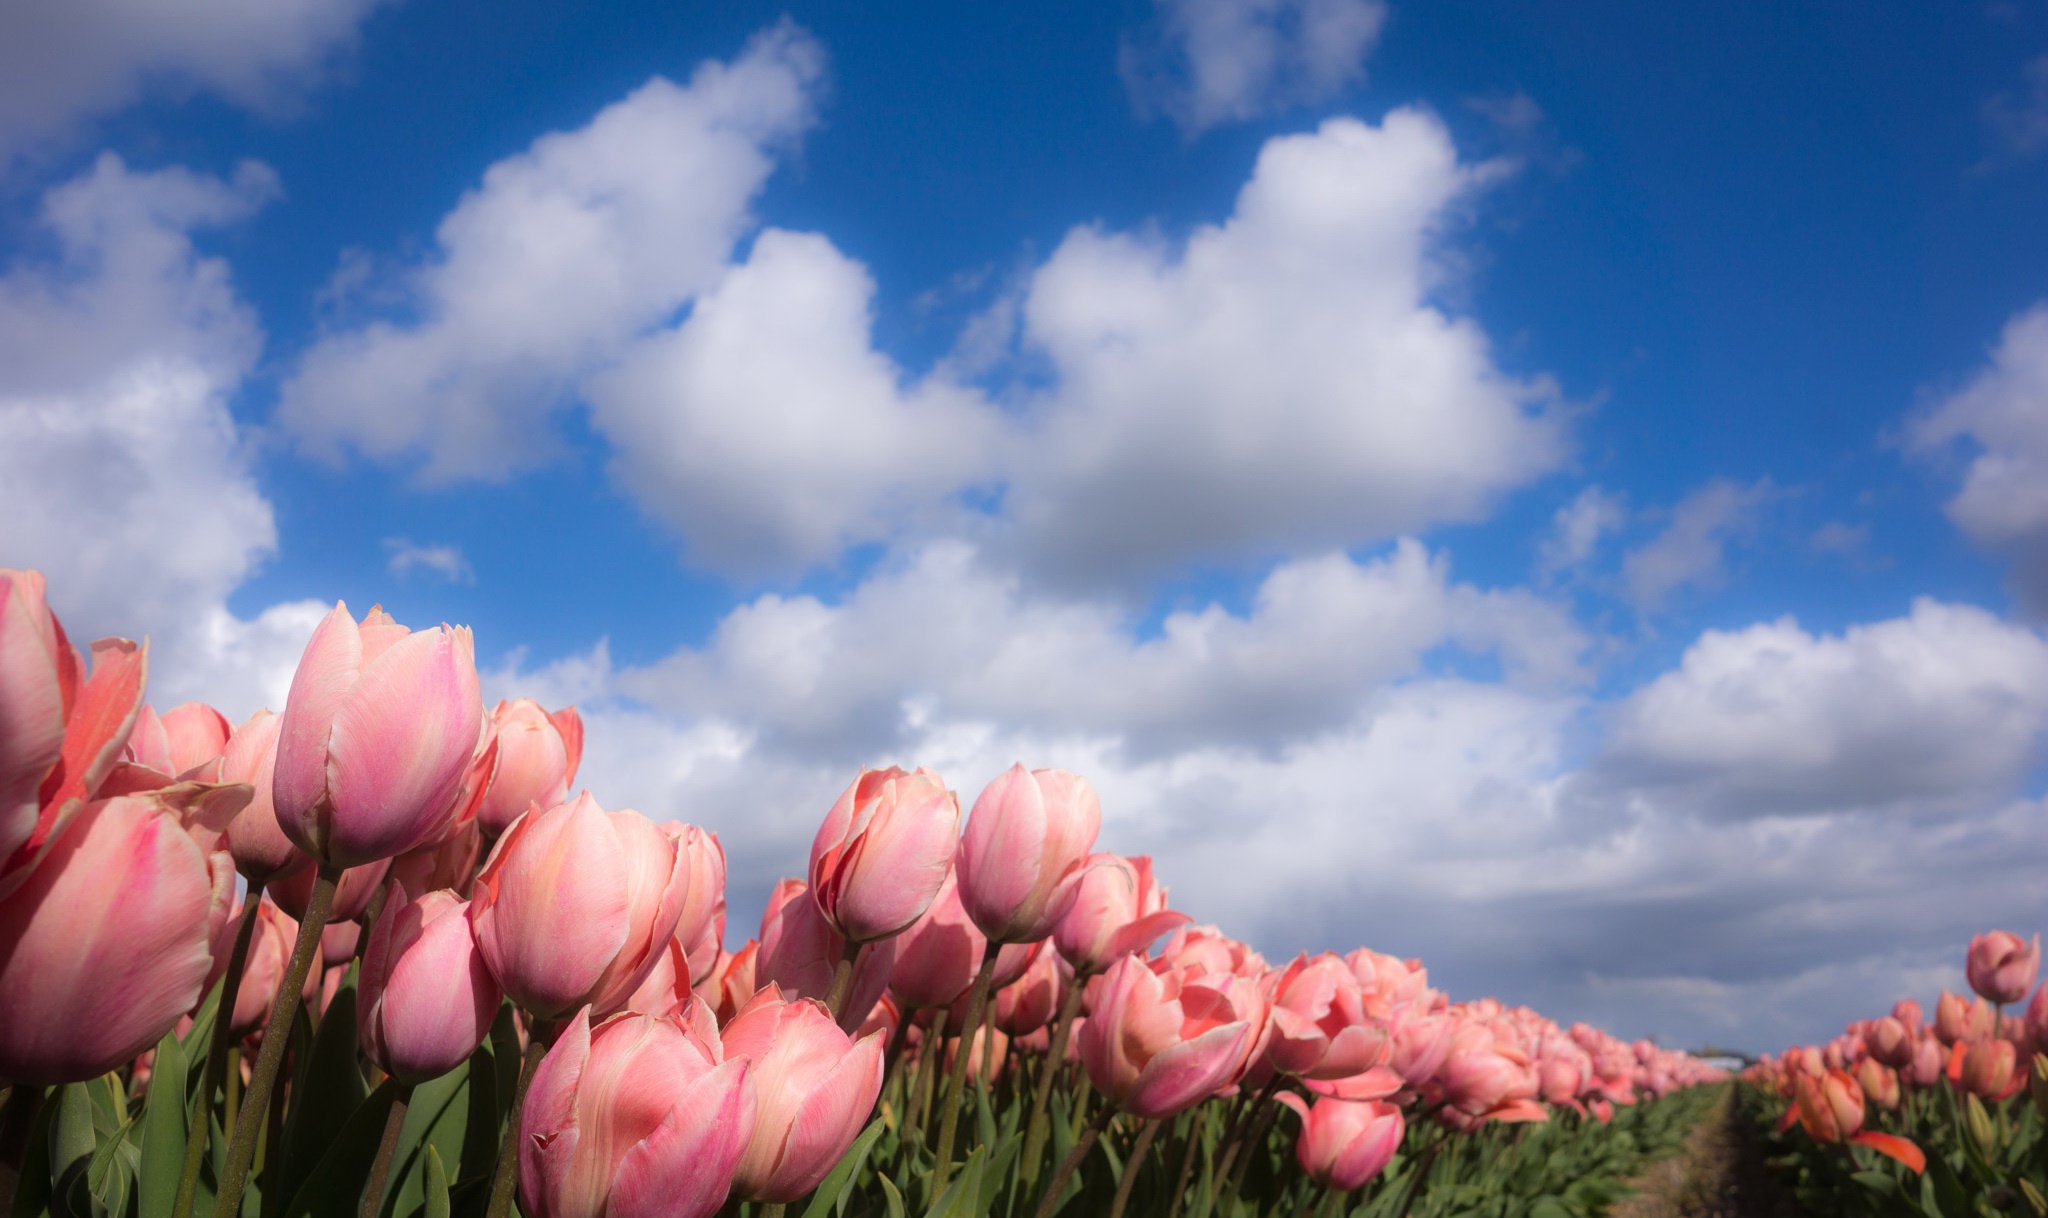 A field of pink flowers in front on some clouds - Tulip